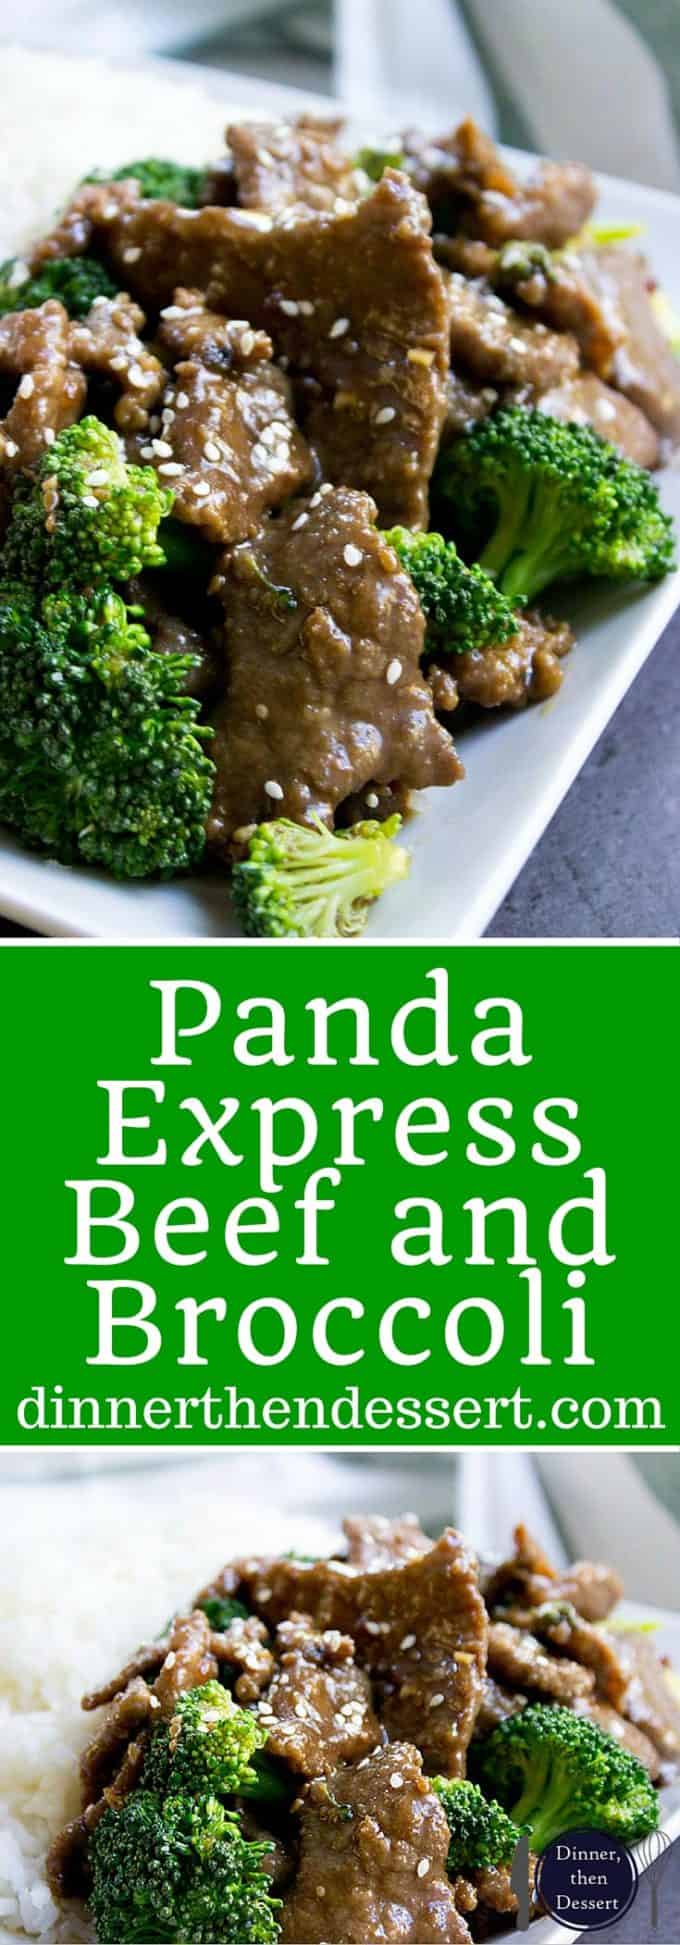 A Panda Express Beef and Broccoli delicious spot-on copycat with tender stir fried flank steak and steamed broccoli in a classic ginger soy sauce.